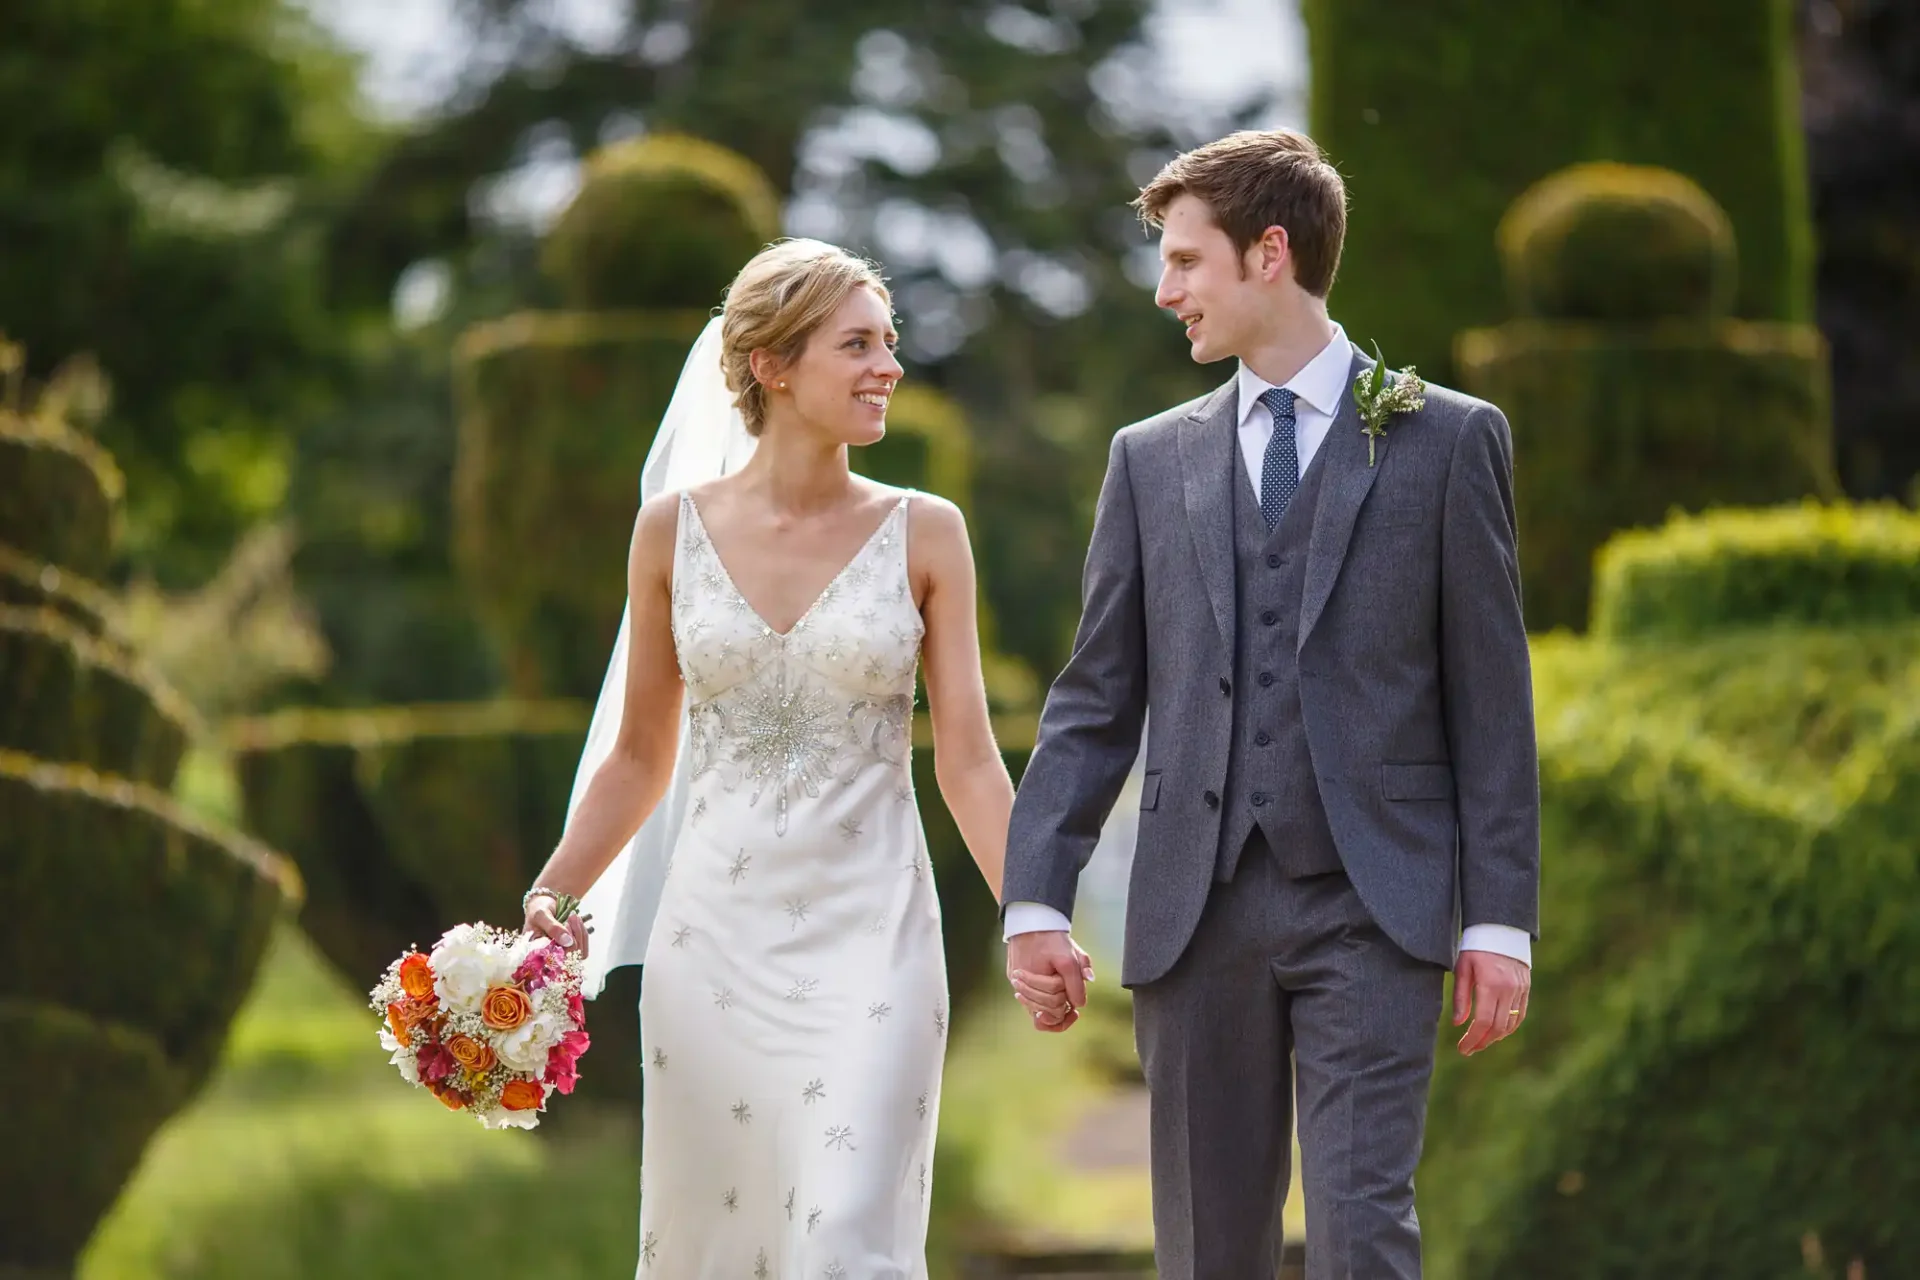 A bride and groom holding hands and smiling at each other while walking in a garden, the bride carrying a bouquet.